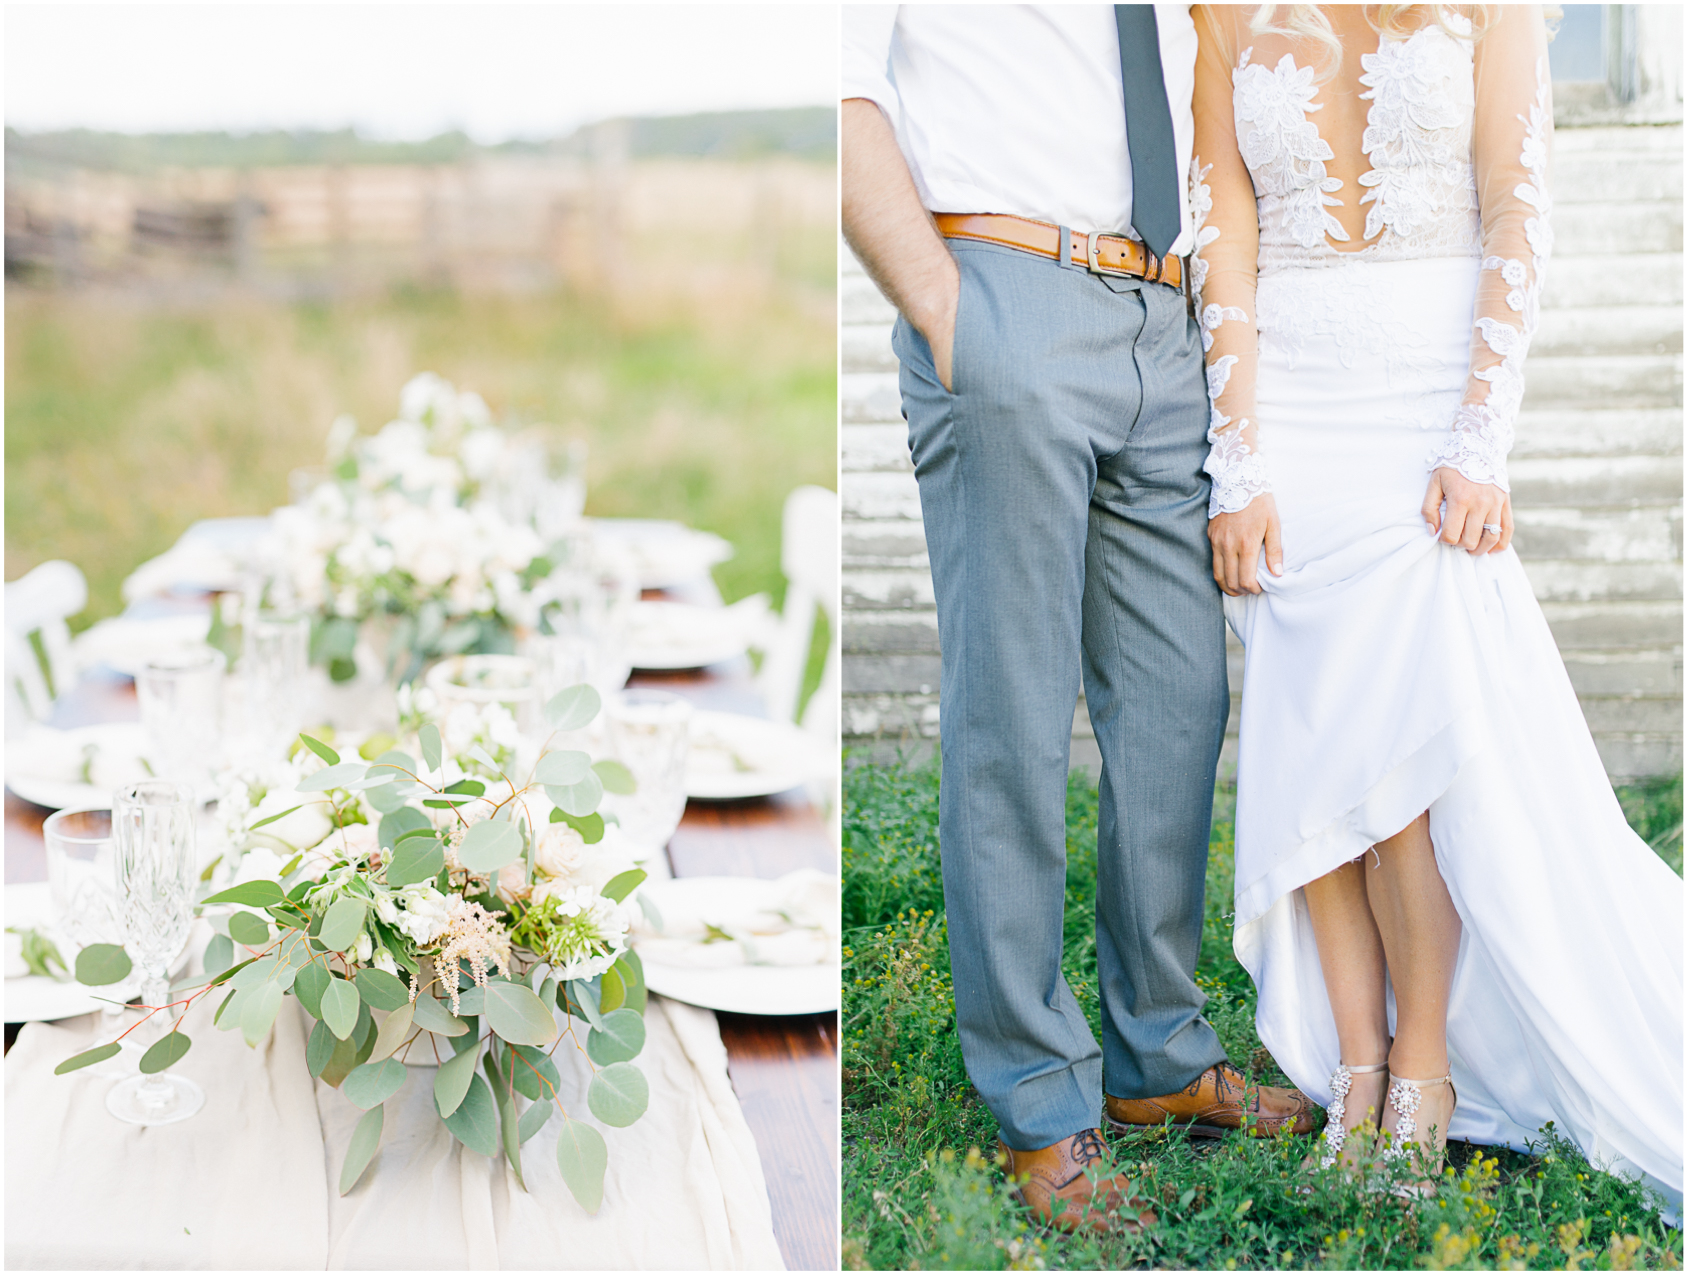 Dream Chasers Workshop on Rose Ranch | Emma Rose Company Education | Styled Shoot on a Ranch | Cattle Ranch Wedding | Rose Ranch Washington Wedding | Dream Chasers with Cameras | Styled Shoot | Wedding Details | Style Me Pretty | VSCO.jpg